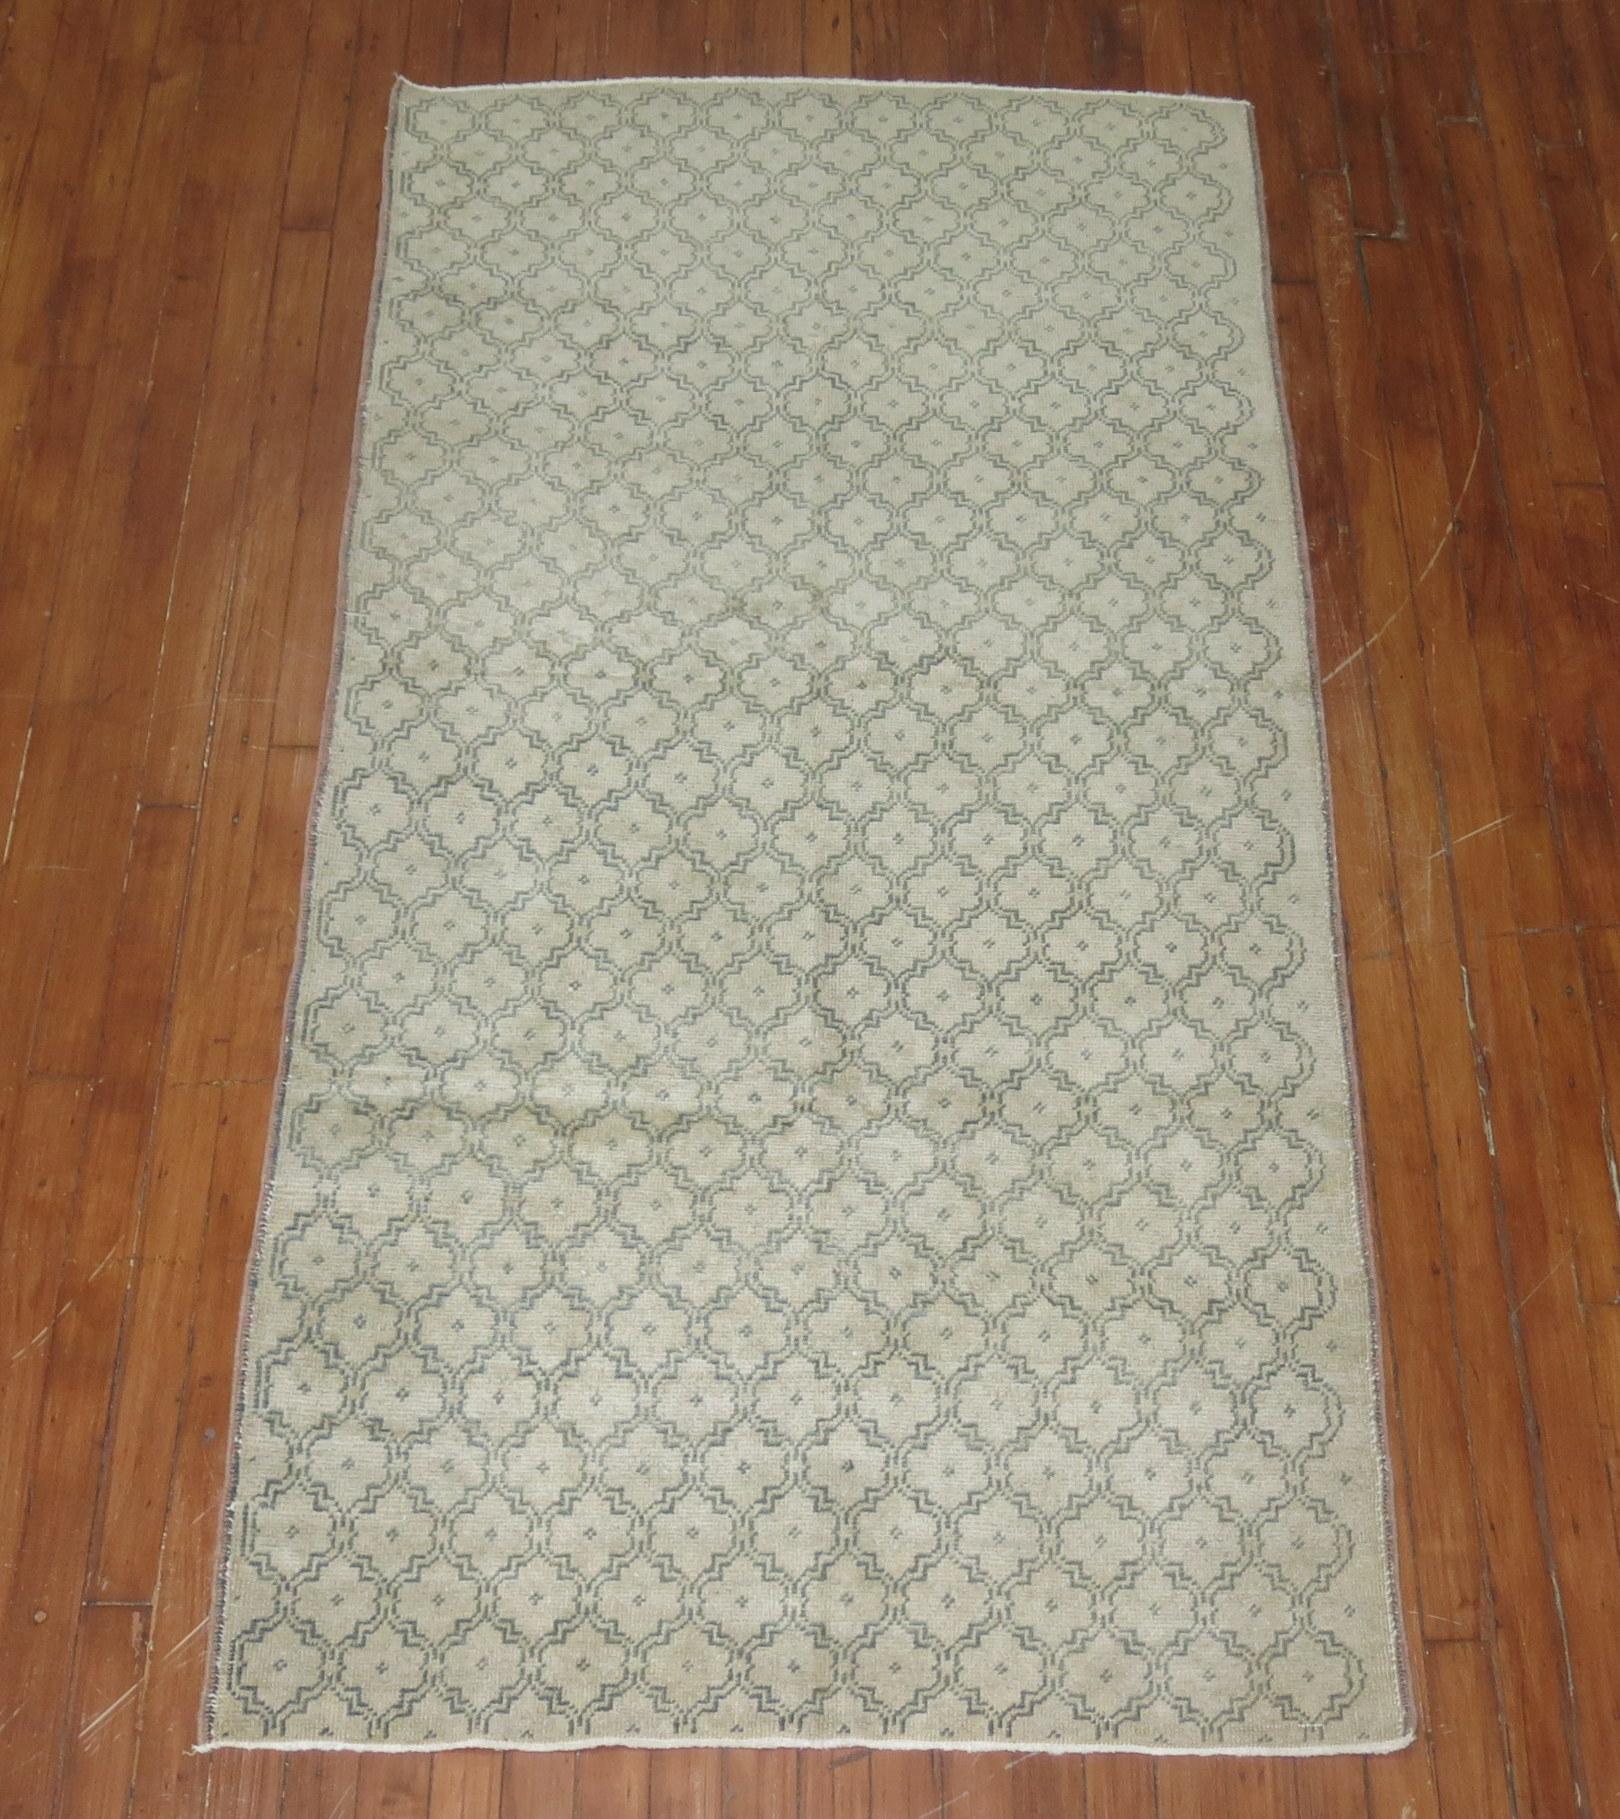 Short mid-20th century Turkish Konya runner. Accents in beige and green with a repetitive design.

Measures: 3'3” x 6'6”.